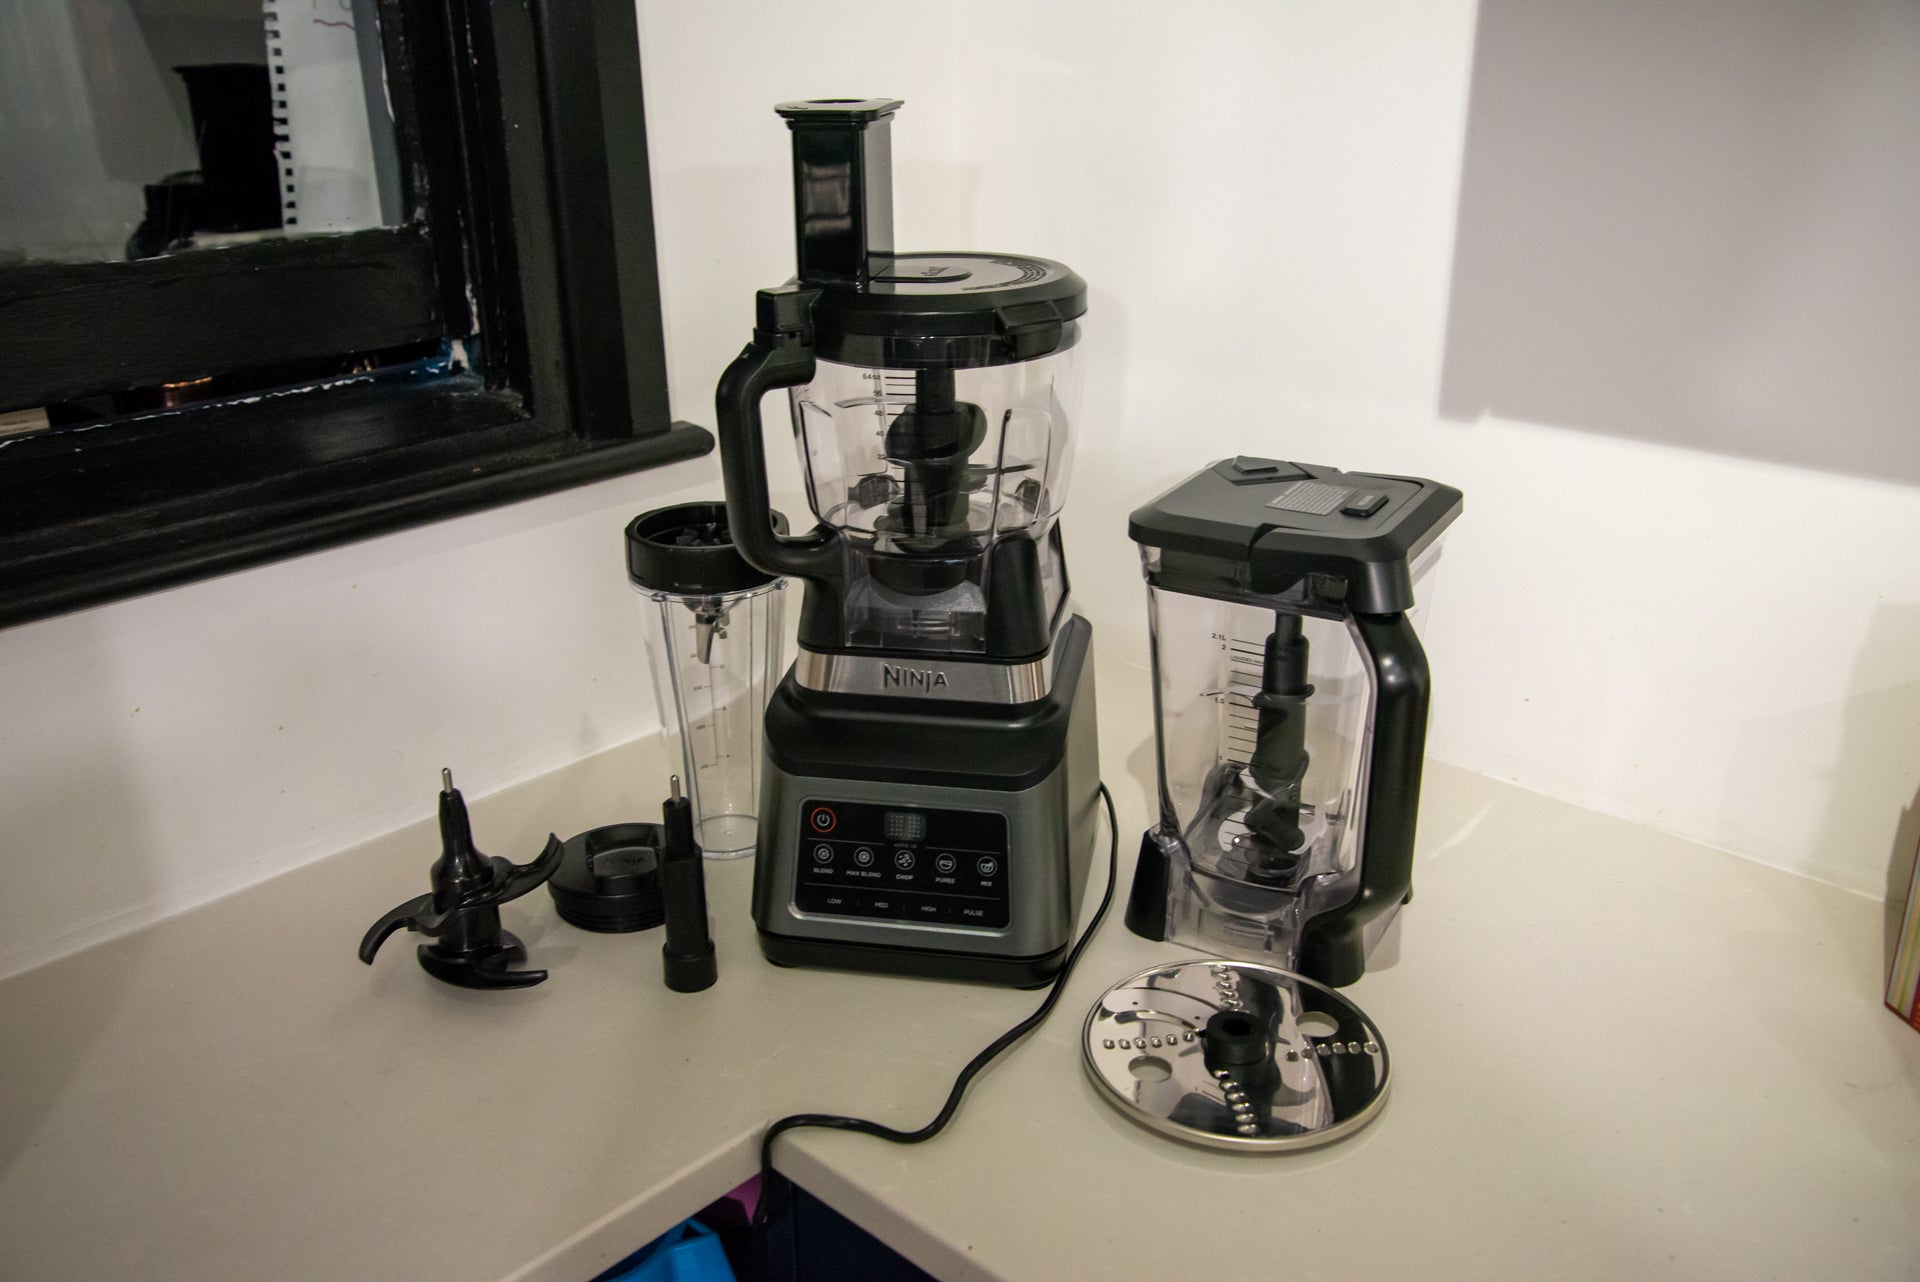 Blender vs Food processor - Which one should you buy?